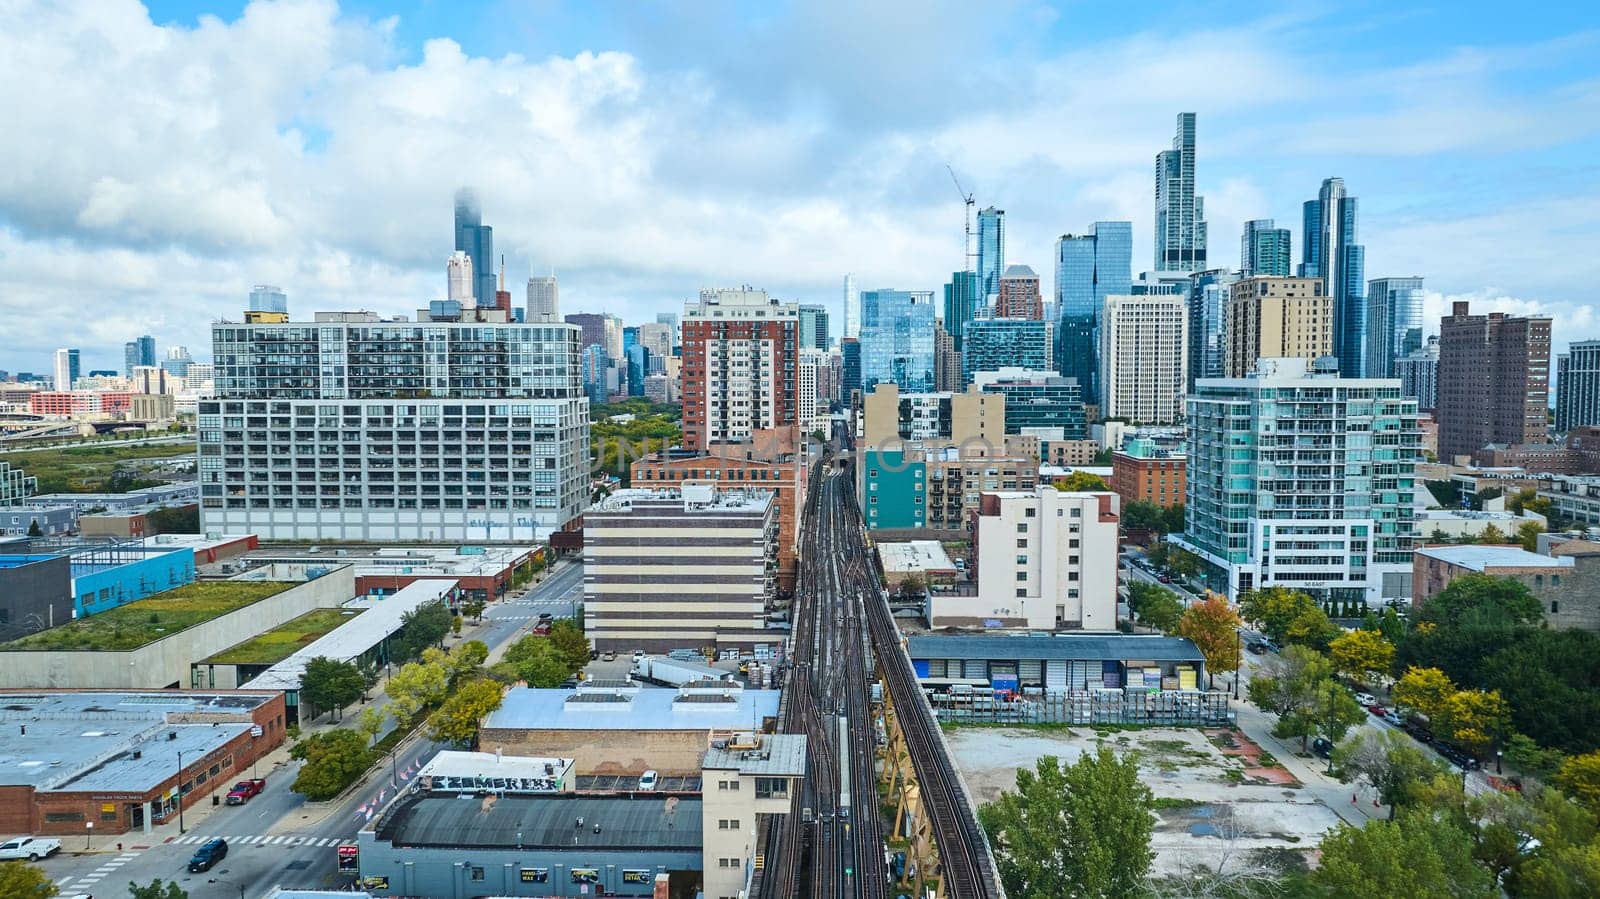 Image of Aerial with railroad tracks leading into skyscraper buildings in downtown Chicago, IL